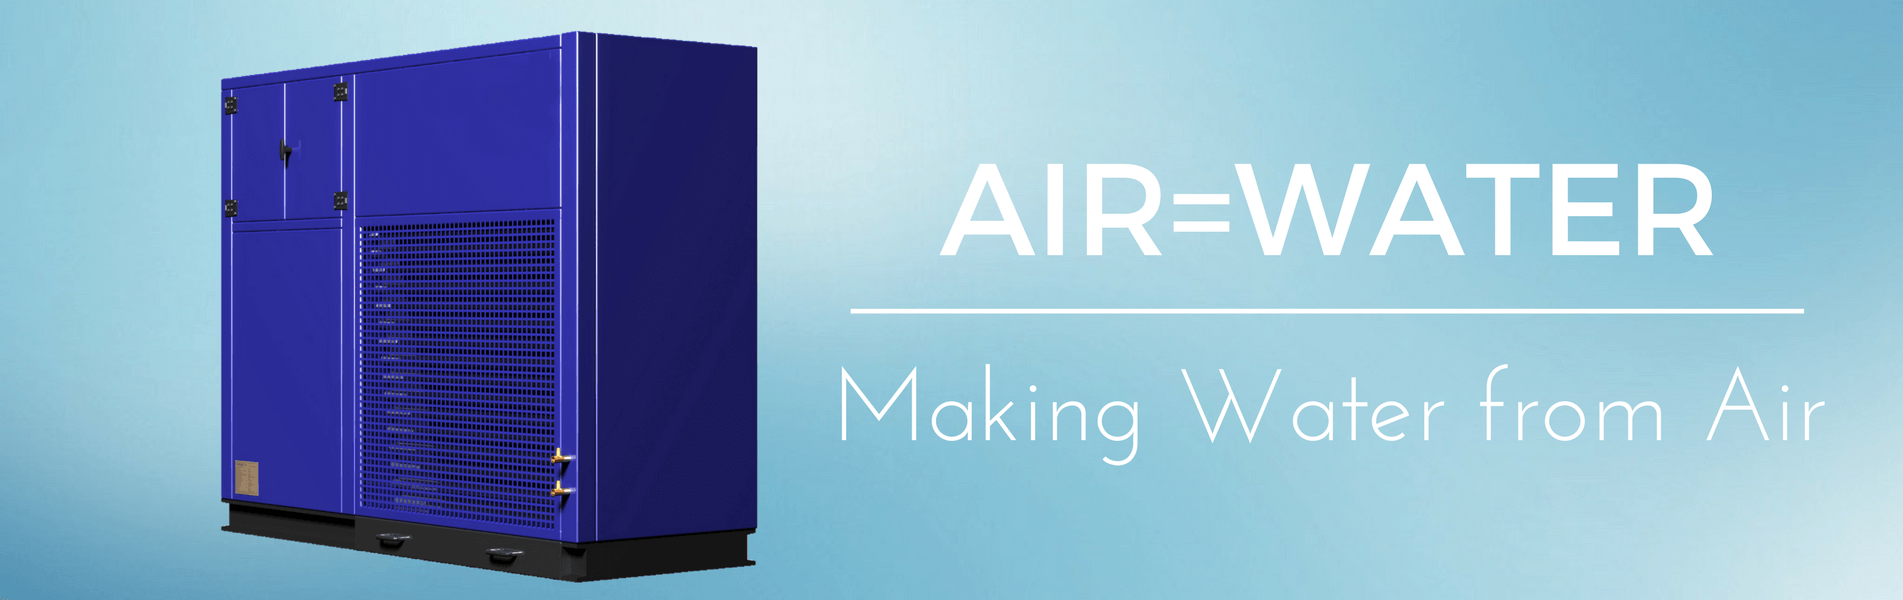 Commercial air water maker, AWG